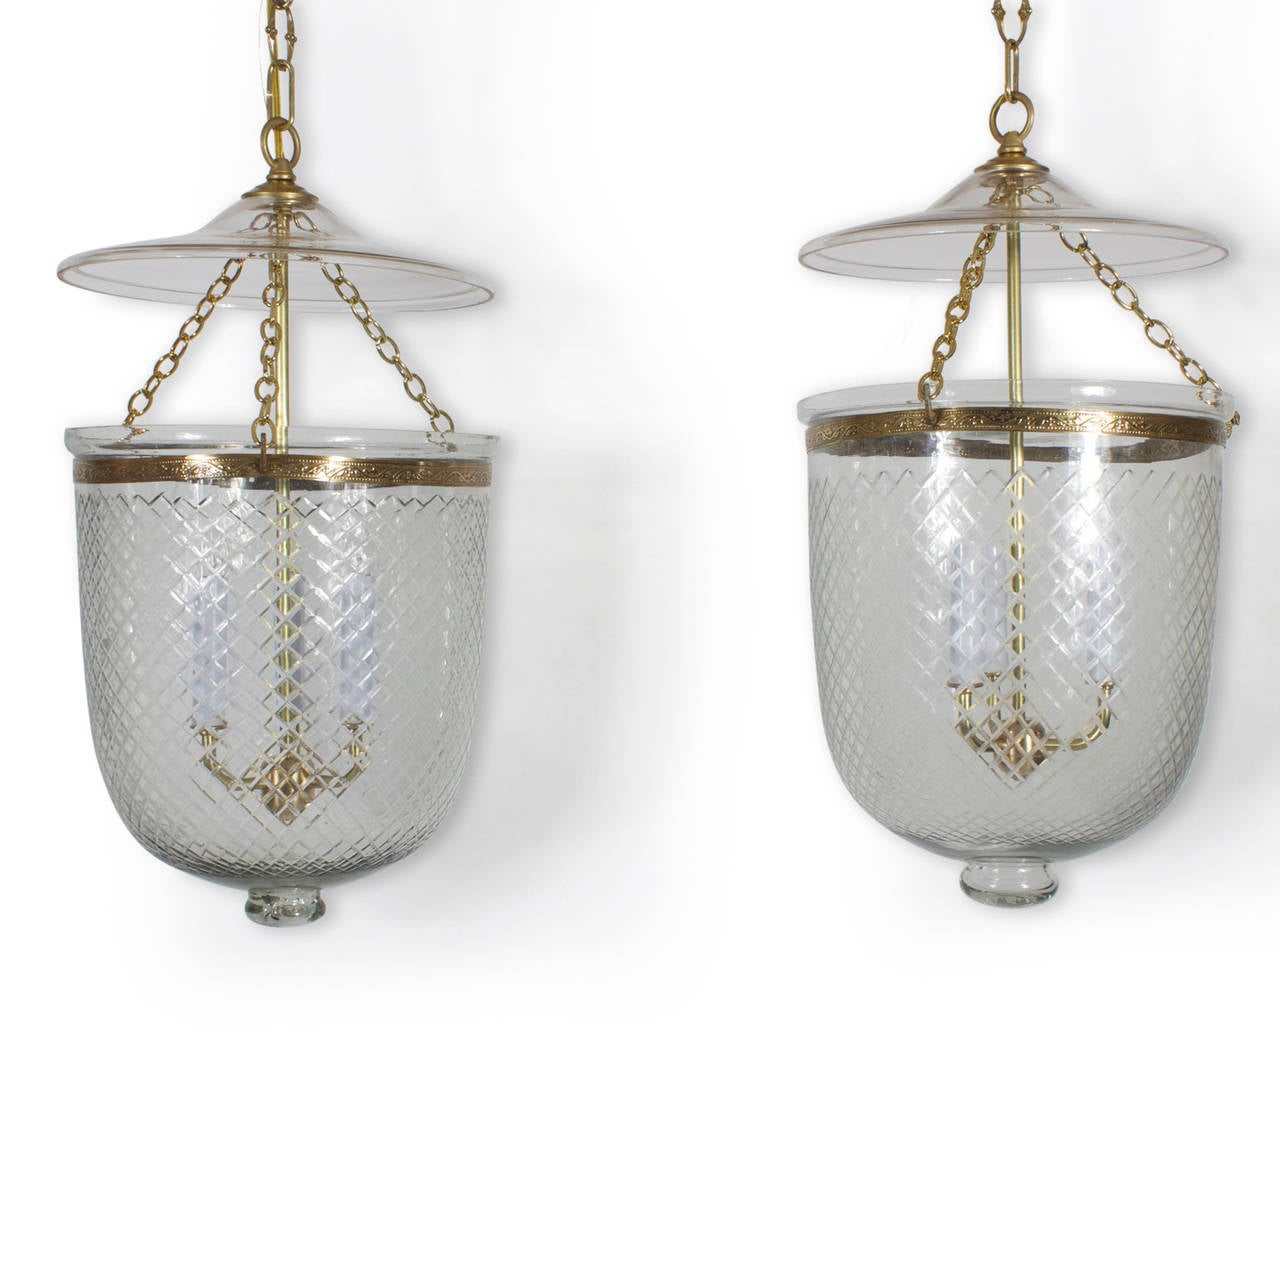 Used in the West Indies, India and England, these vintage, cross cut glass and brass bell jar pendant lights, or hurricane chandeliers  have a classic ancient chandelier form, they add romance and mystery to all decors. Timeless lighting still